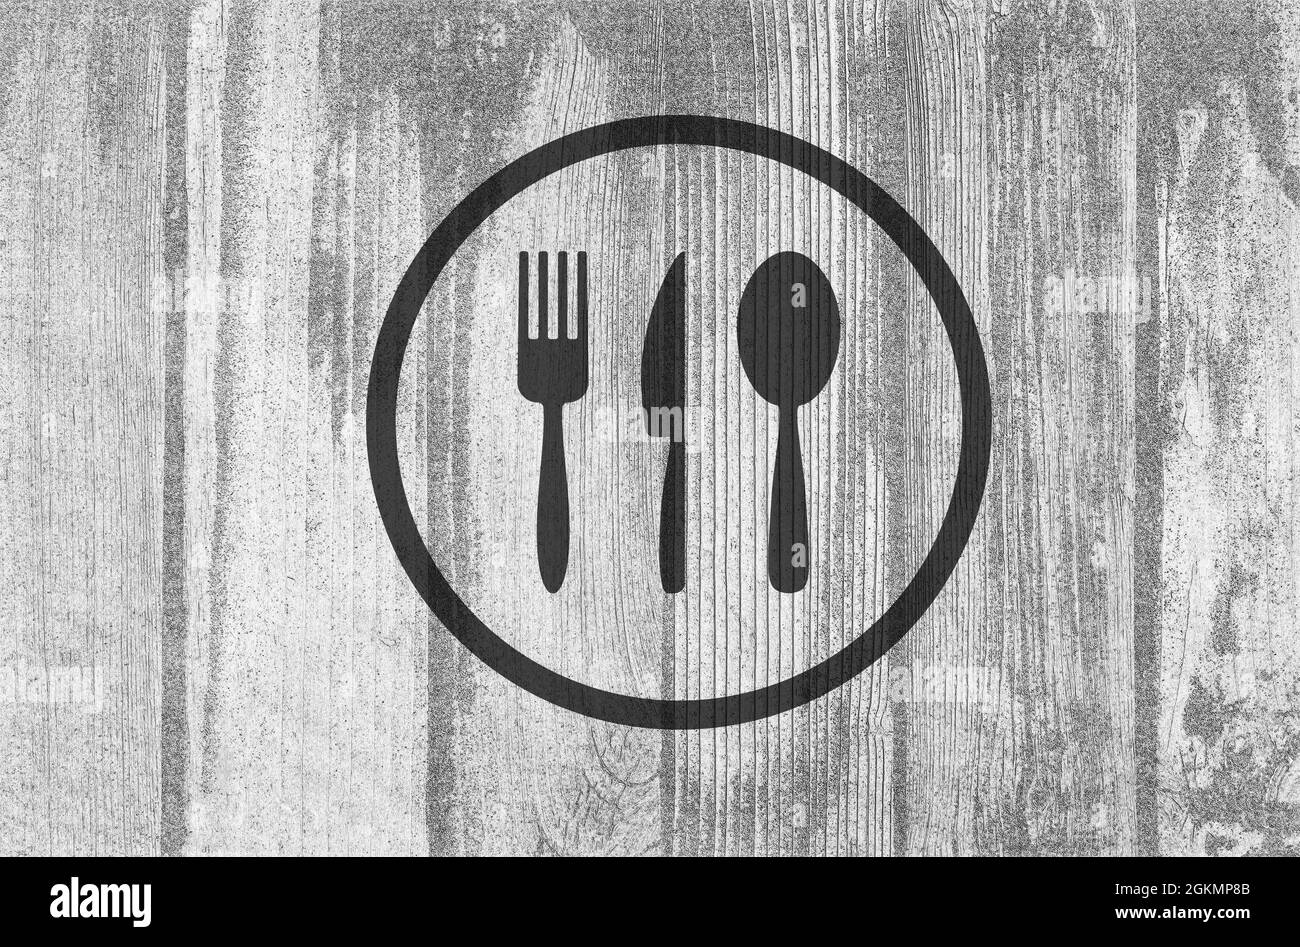 Cutlery icons on planked wood background. Closeup natural template Stock Photo